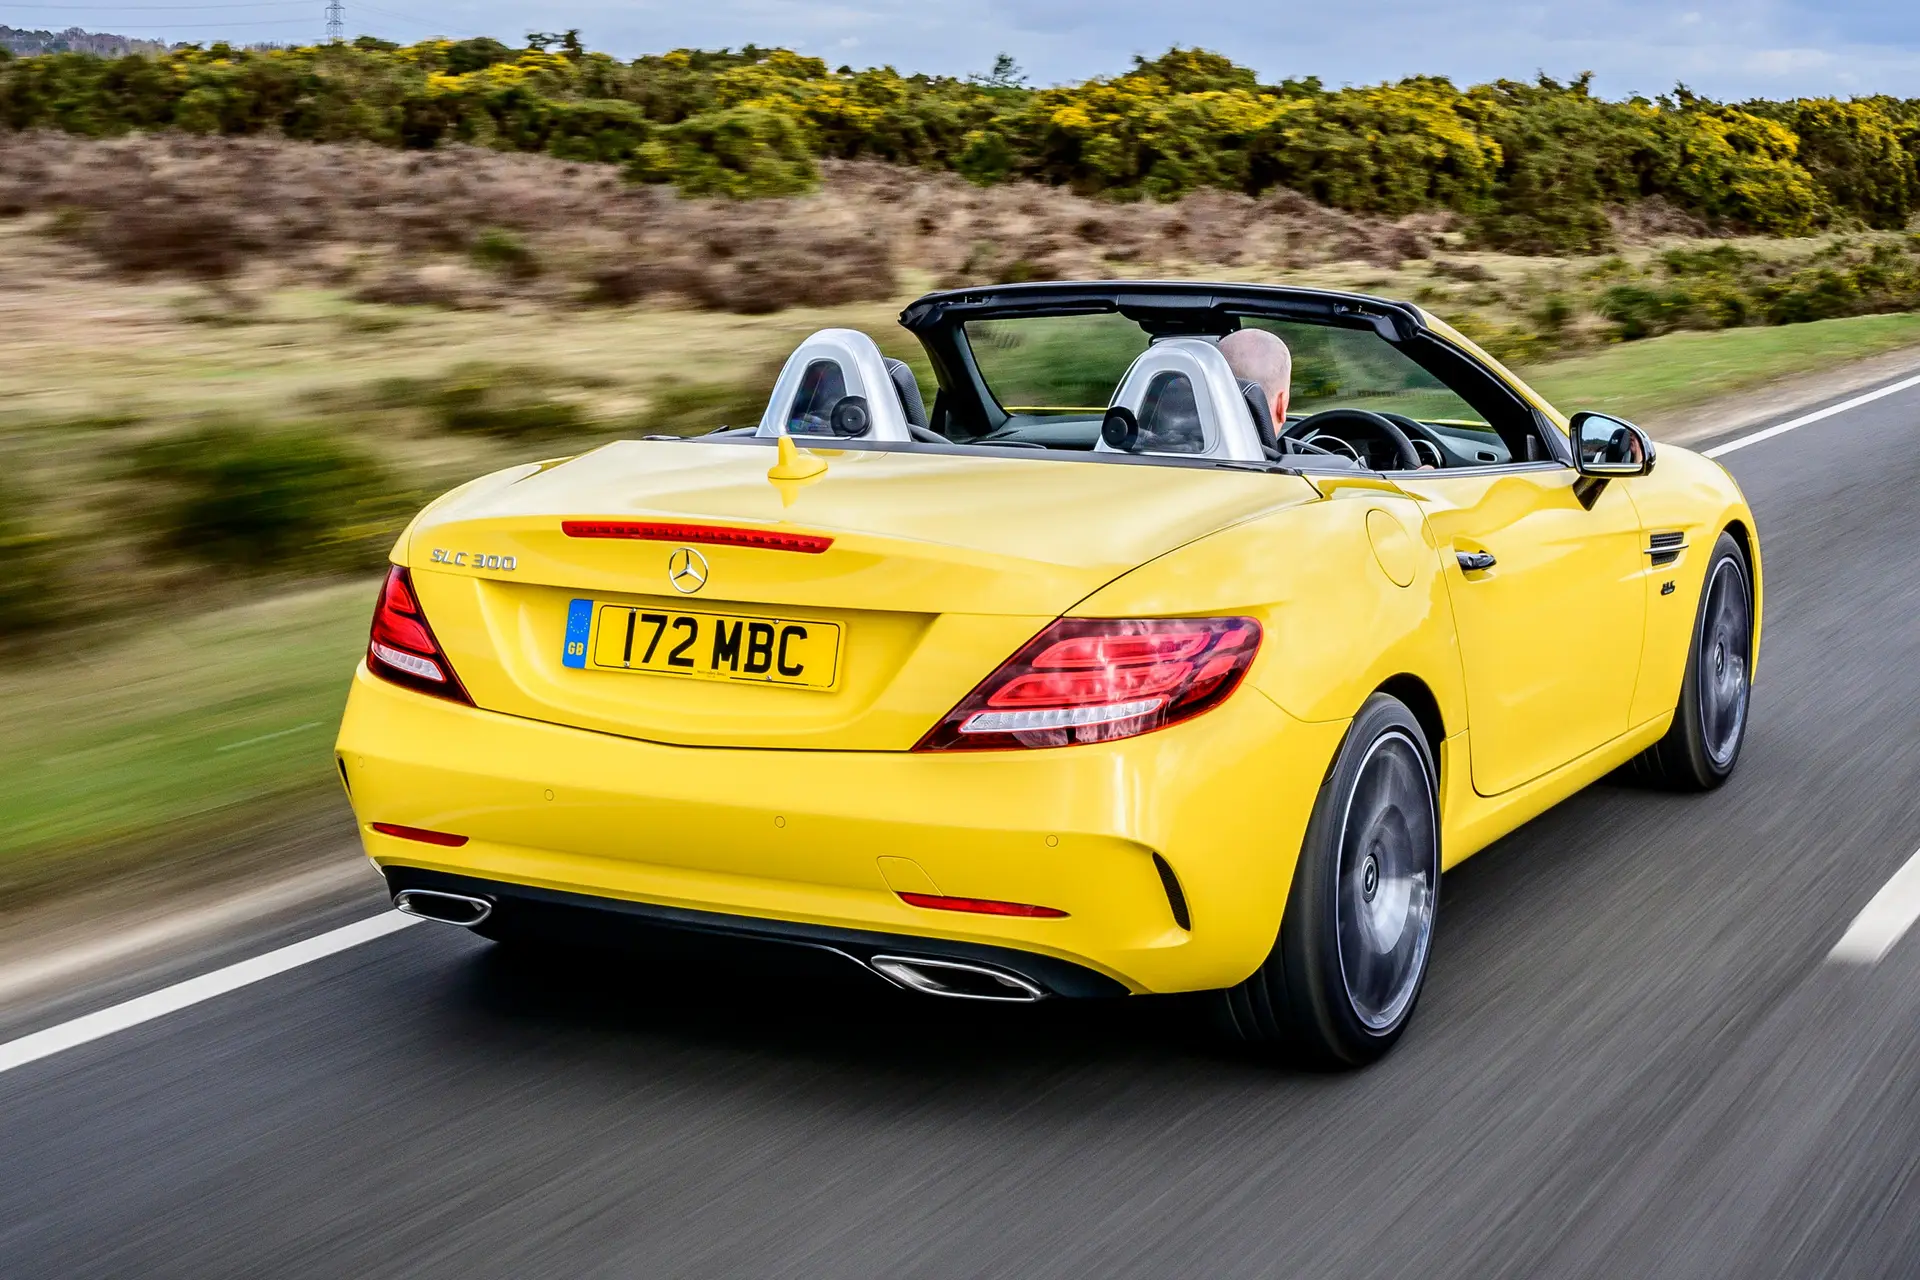 Mercedes-Benz SLC (2016-2020) Review: exterior rear three quarter photo of the Mercedes-Benz SLC on the road